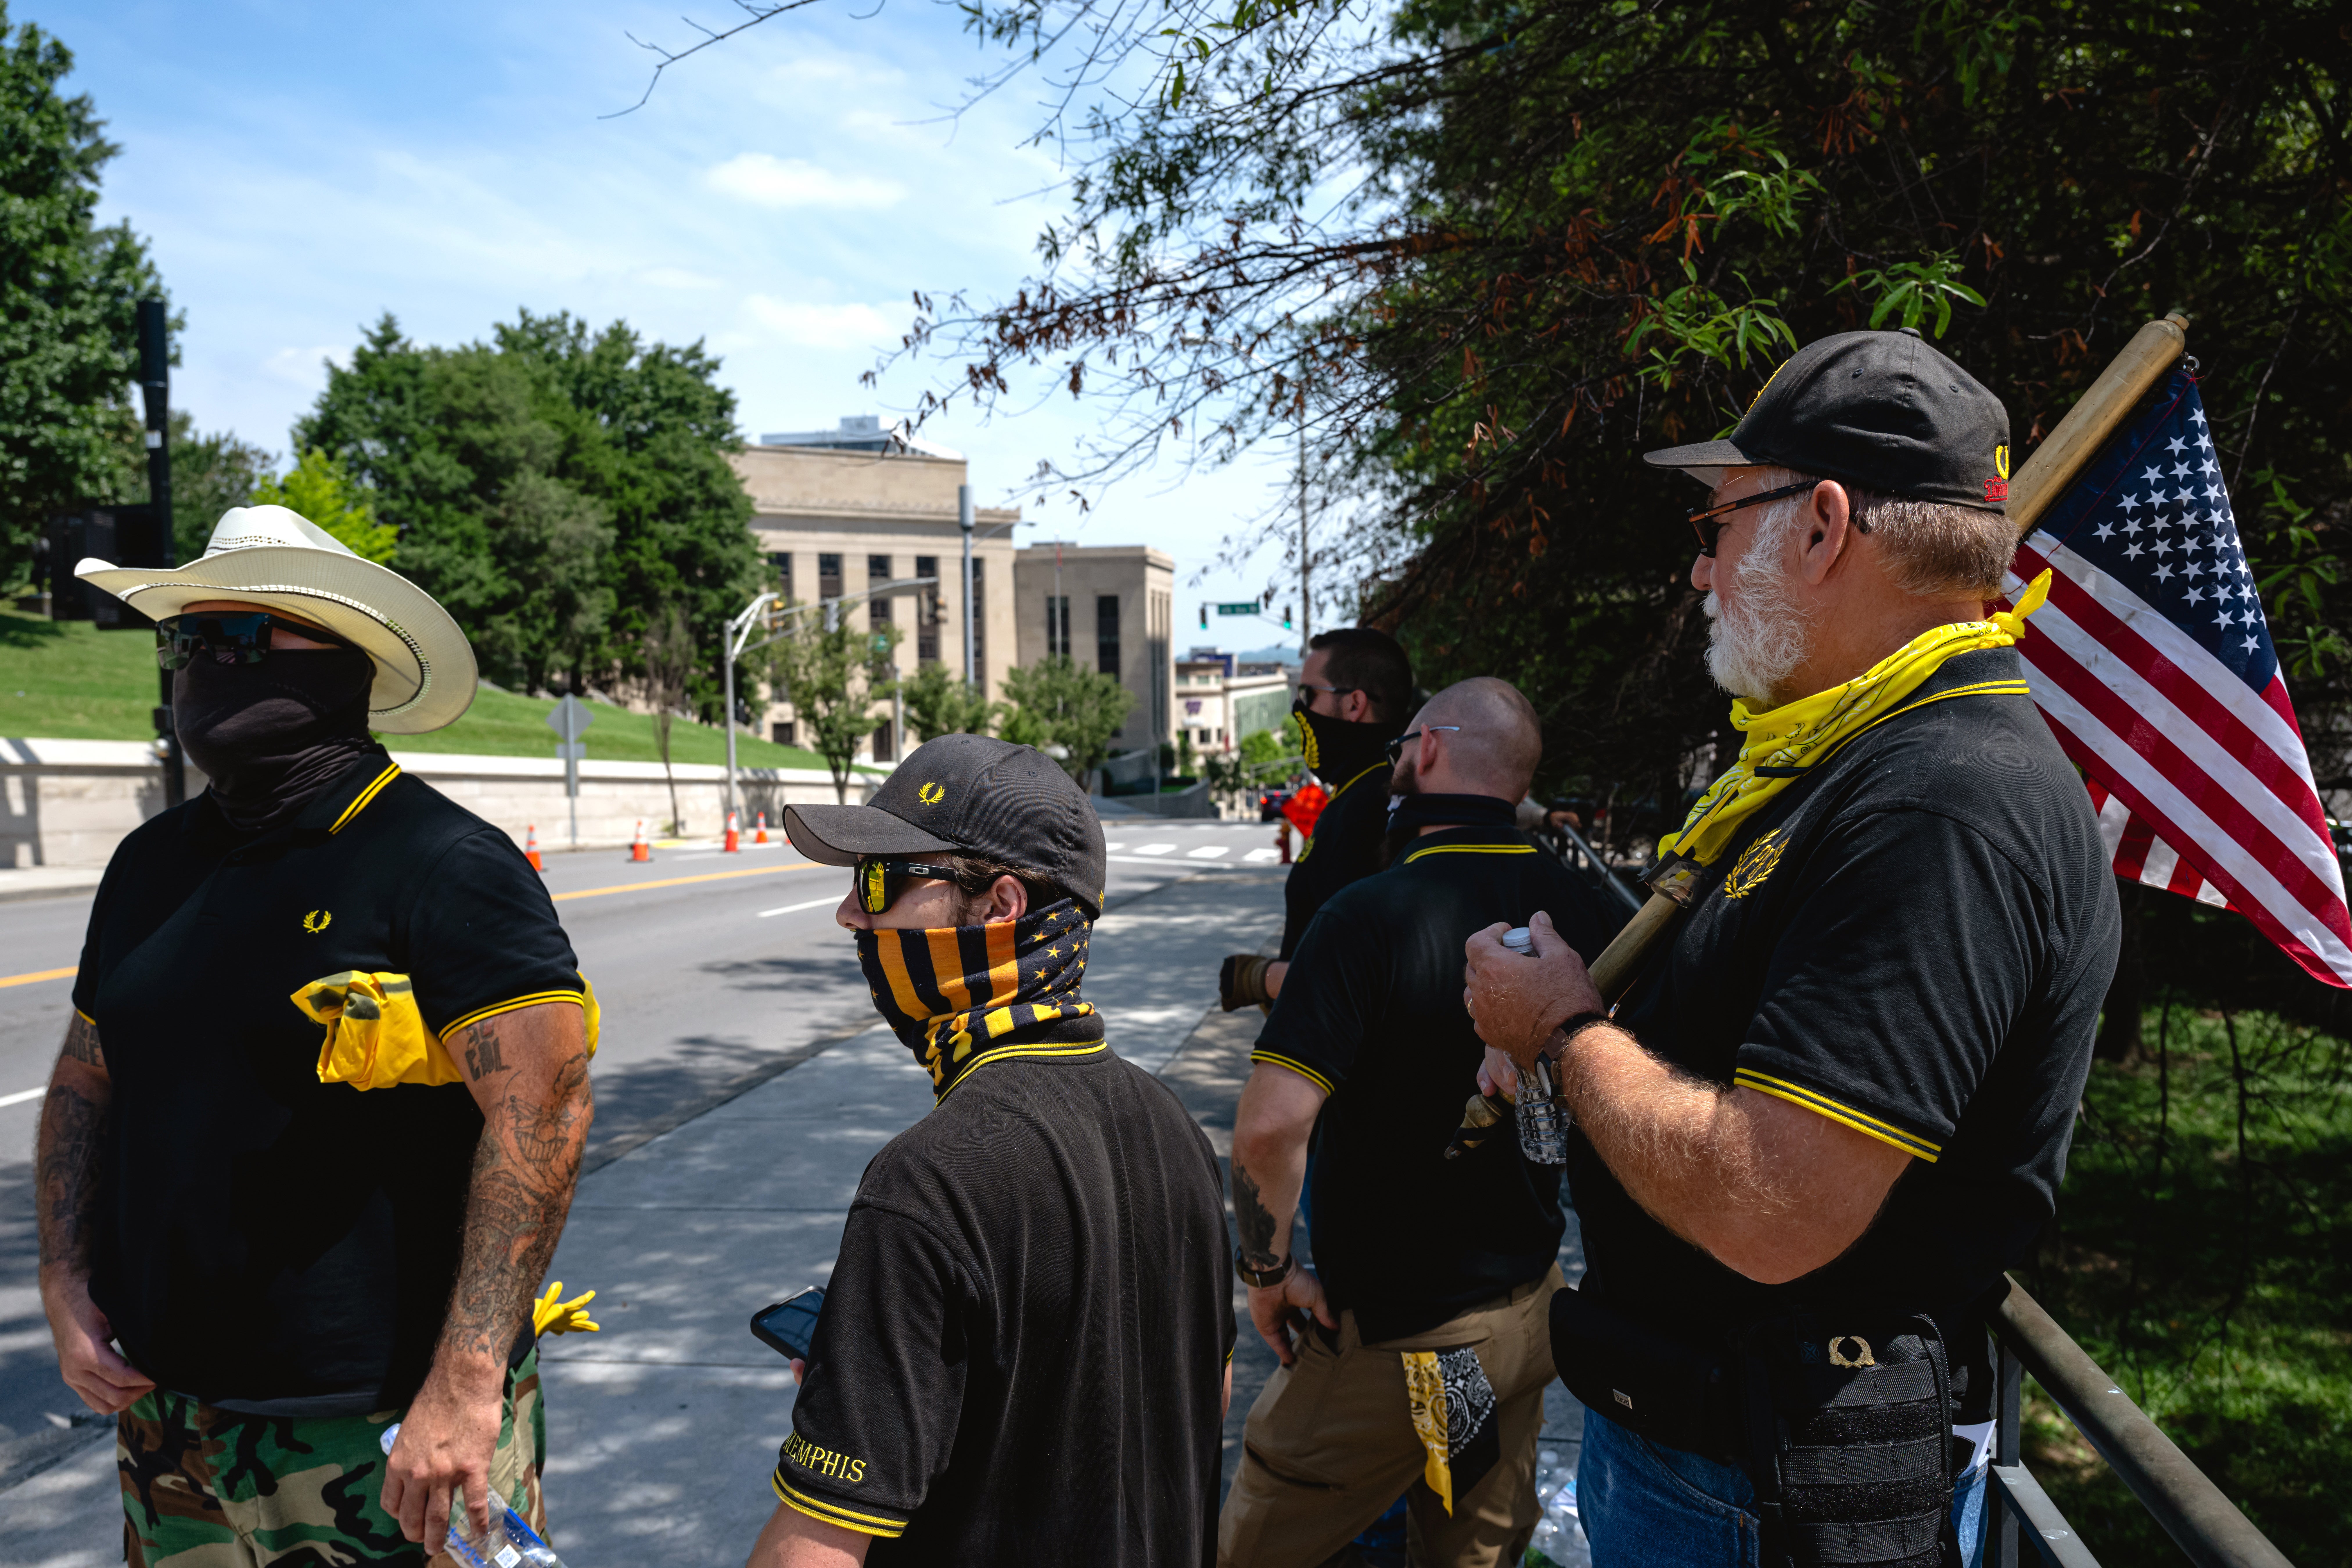 Members of the Proud Boys gathered outside the Tennessee state capitol on 21 August